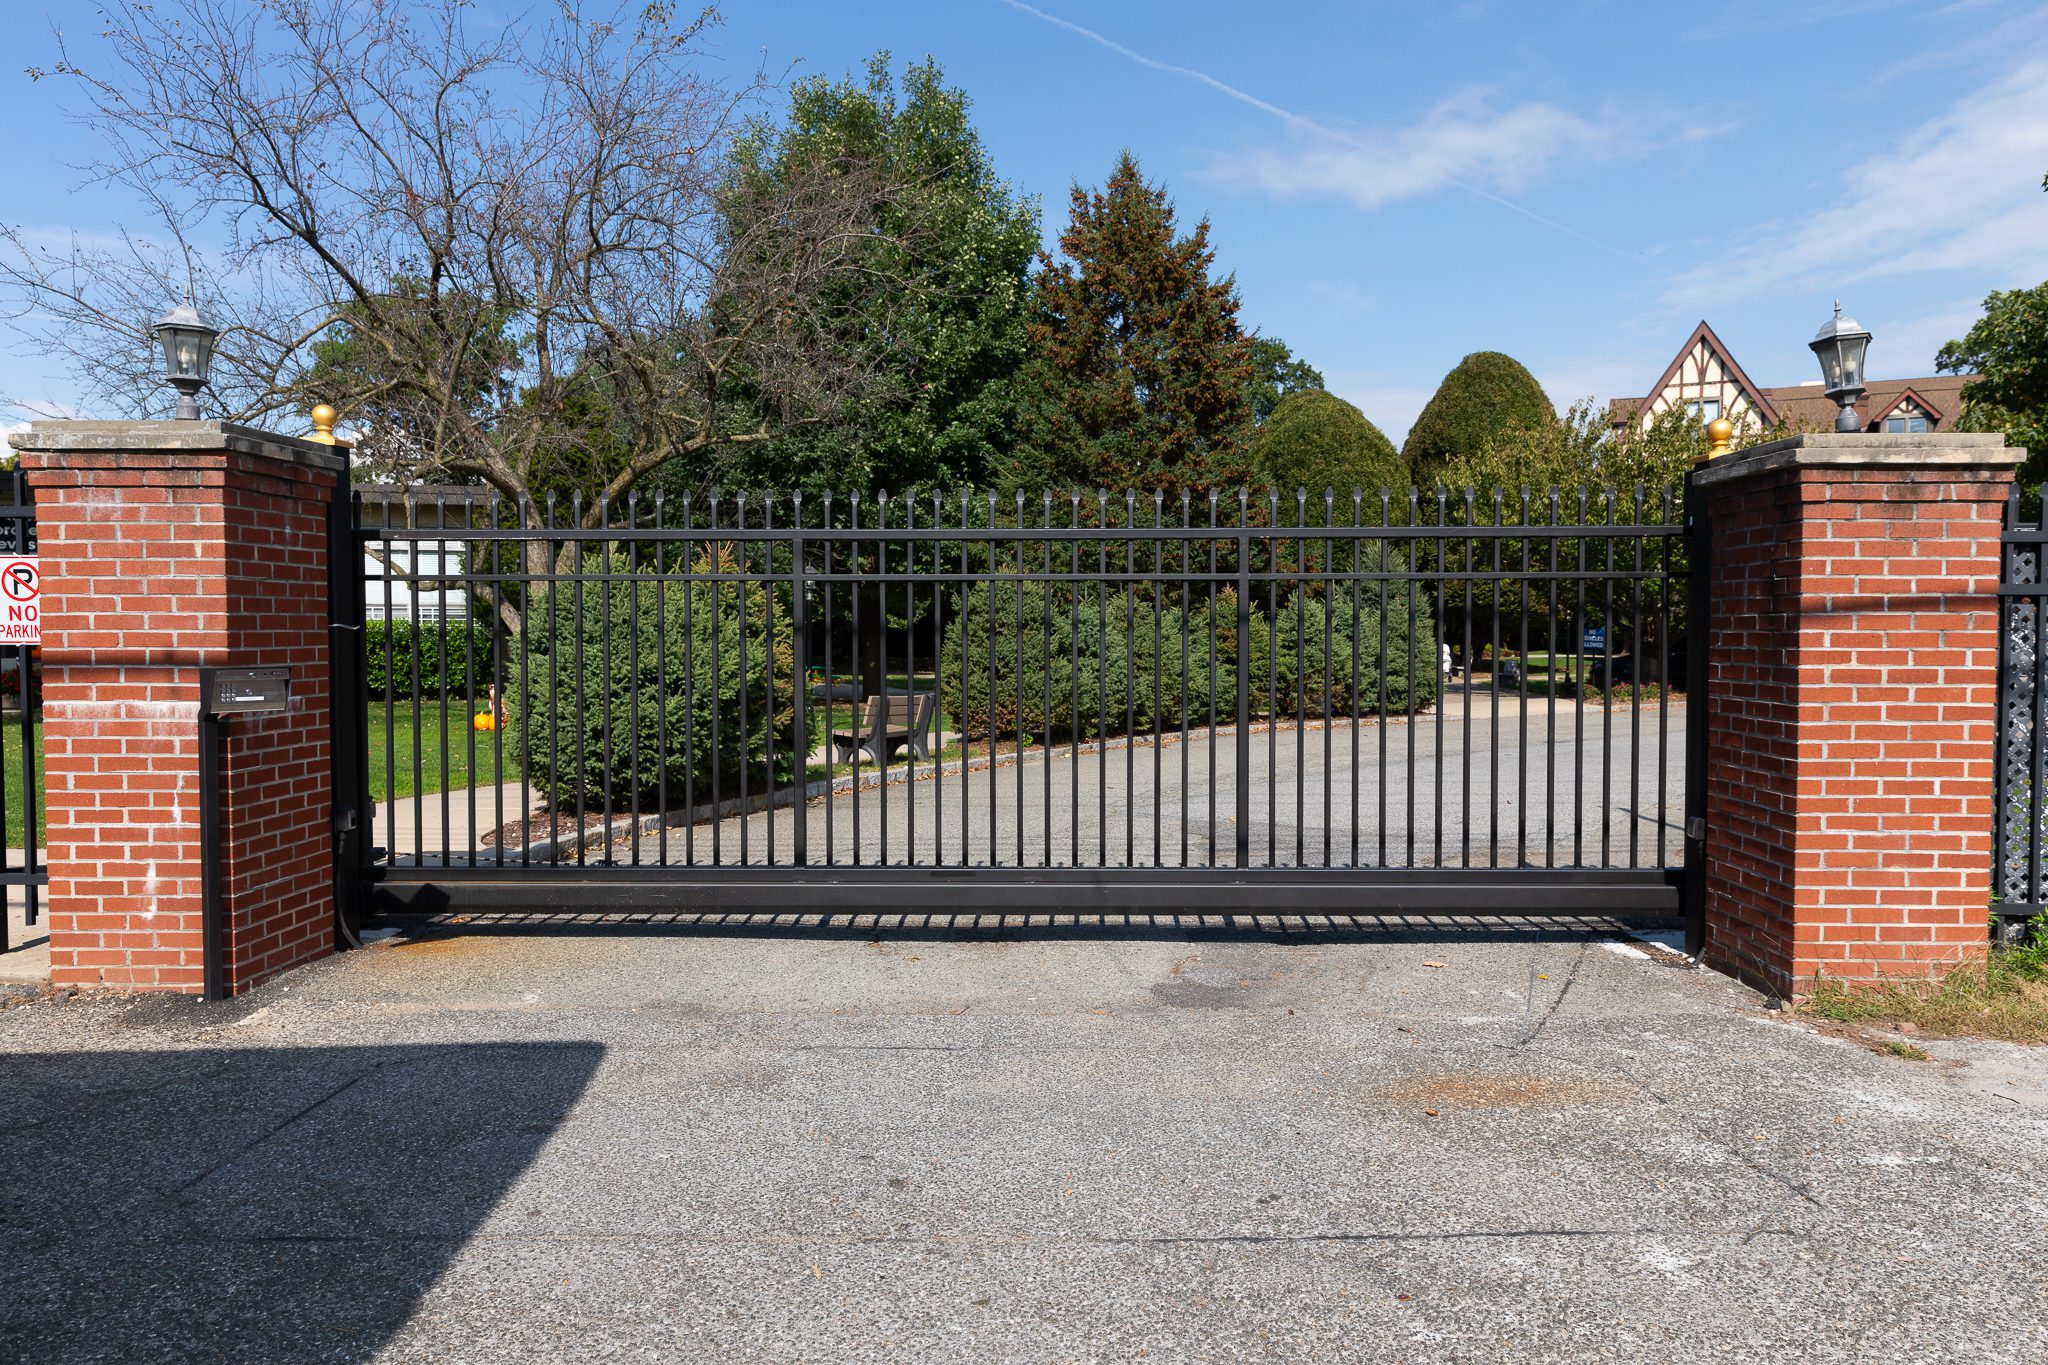 A traditional wrought iron sliding gate.